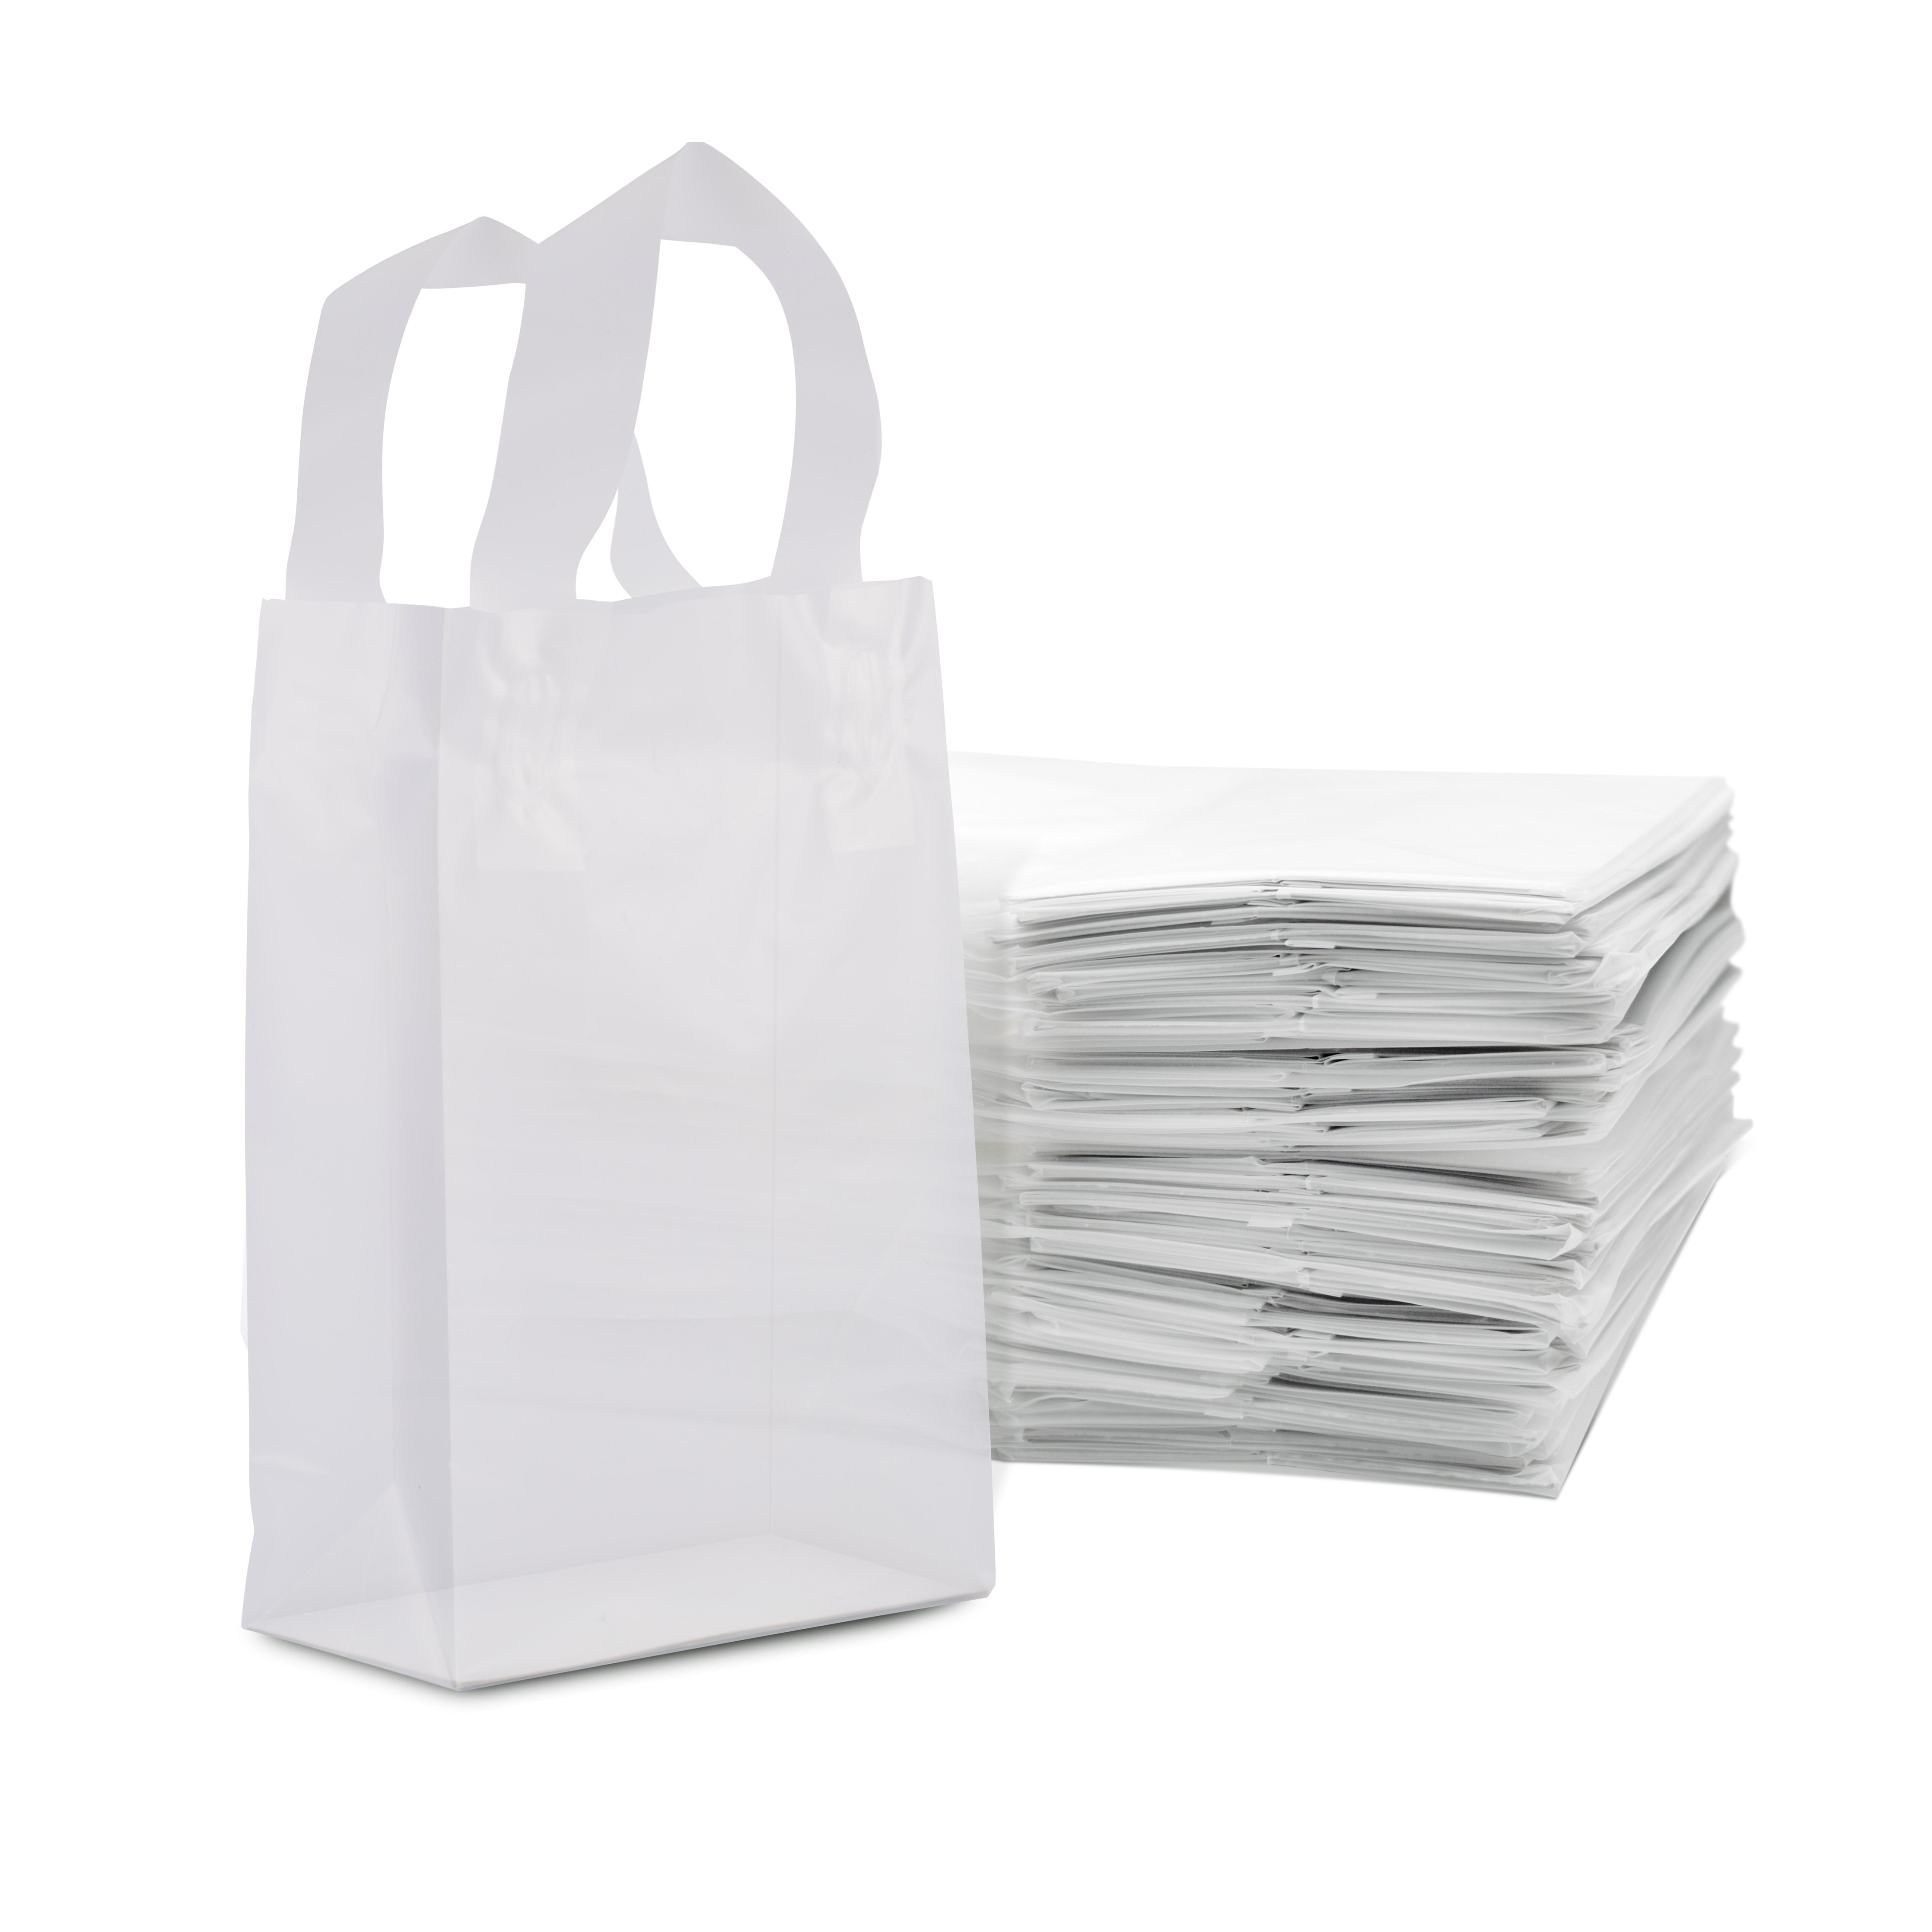 GIFT SHOP CARRIER BAG BOUTIQUE RETAIL SMALL & LARGE SILVER PLASTIC BAGS 